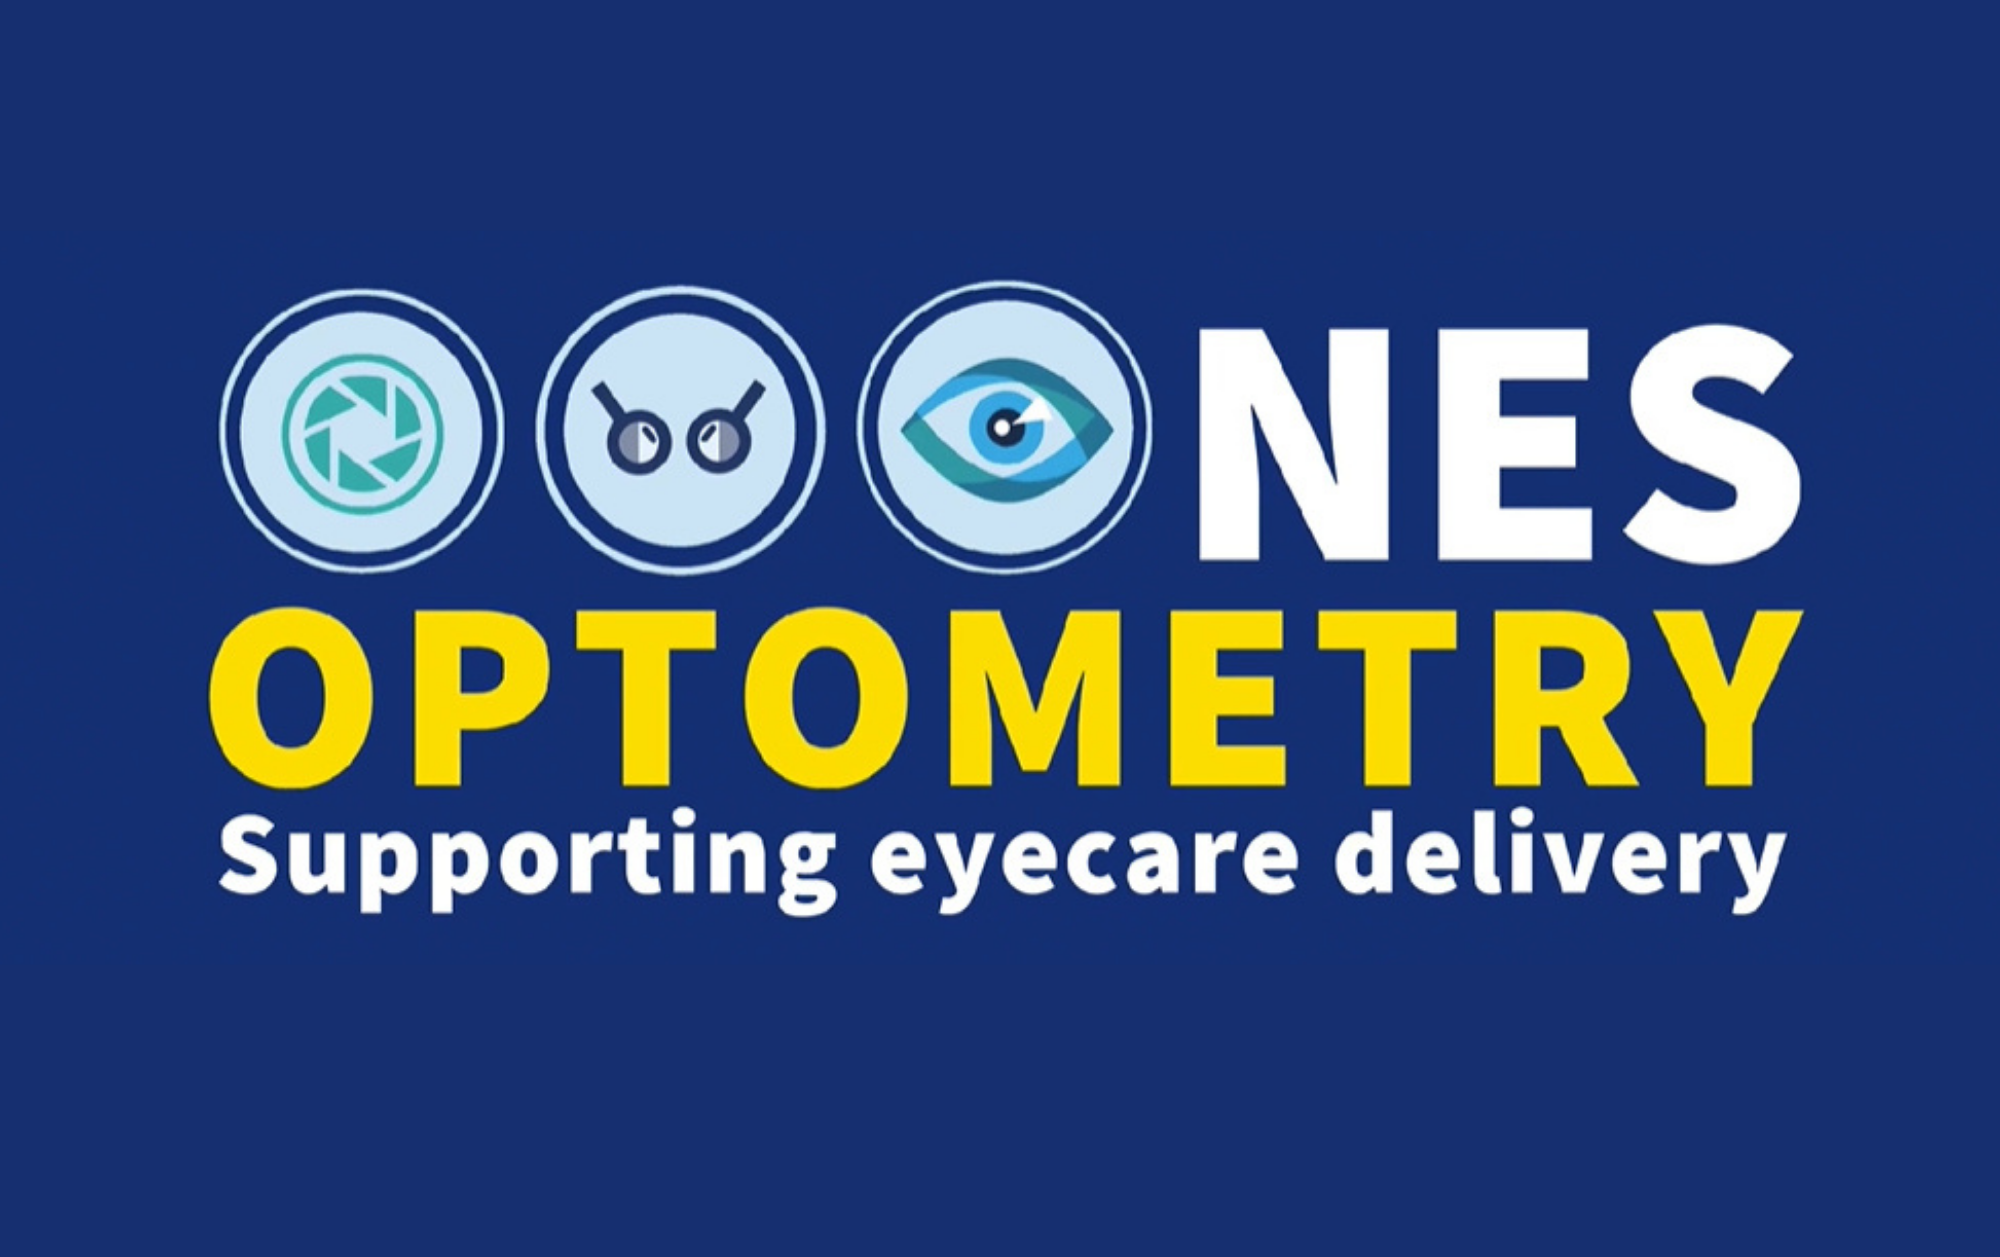 Supporting better community glaucoma care